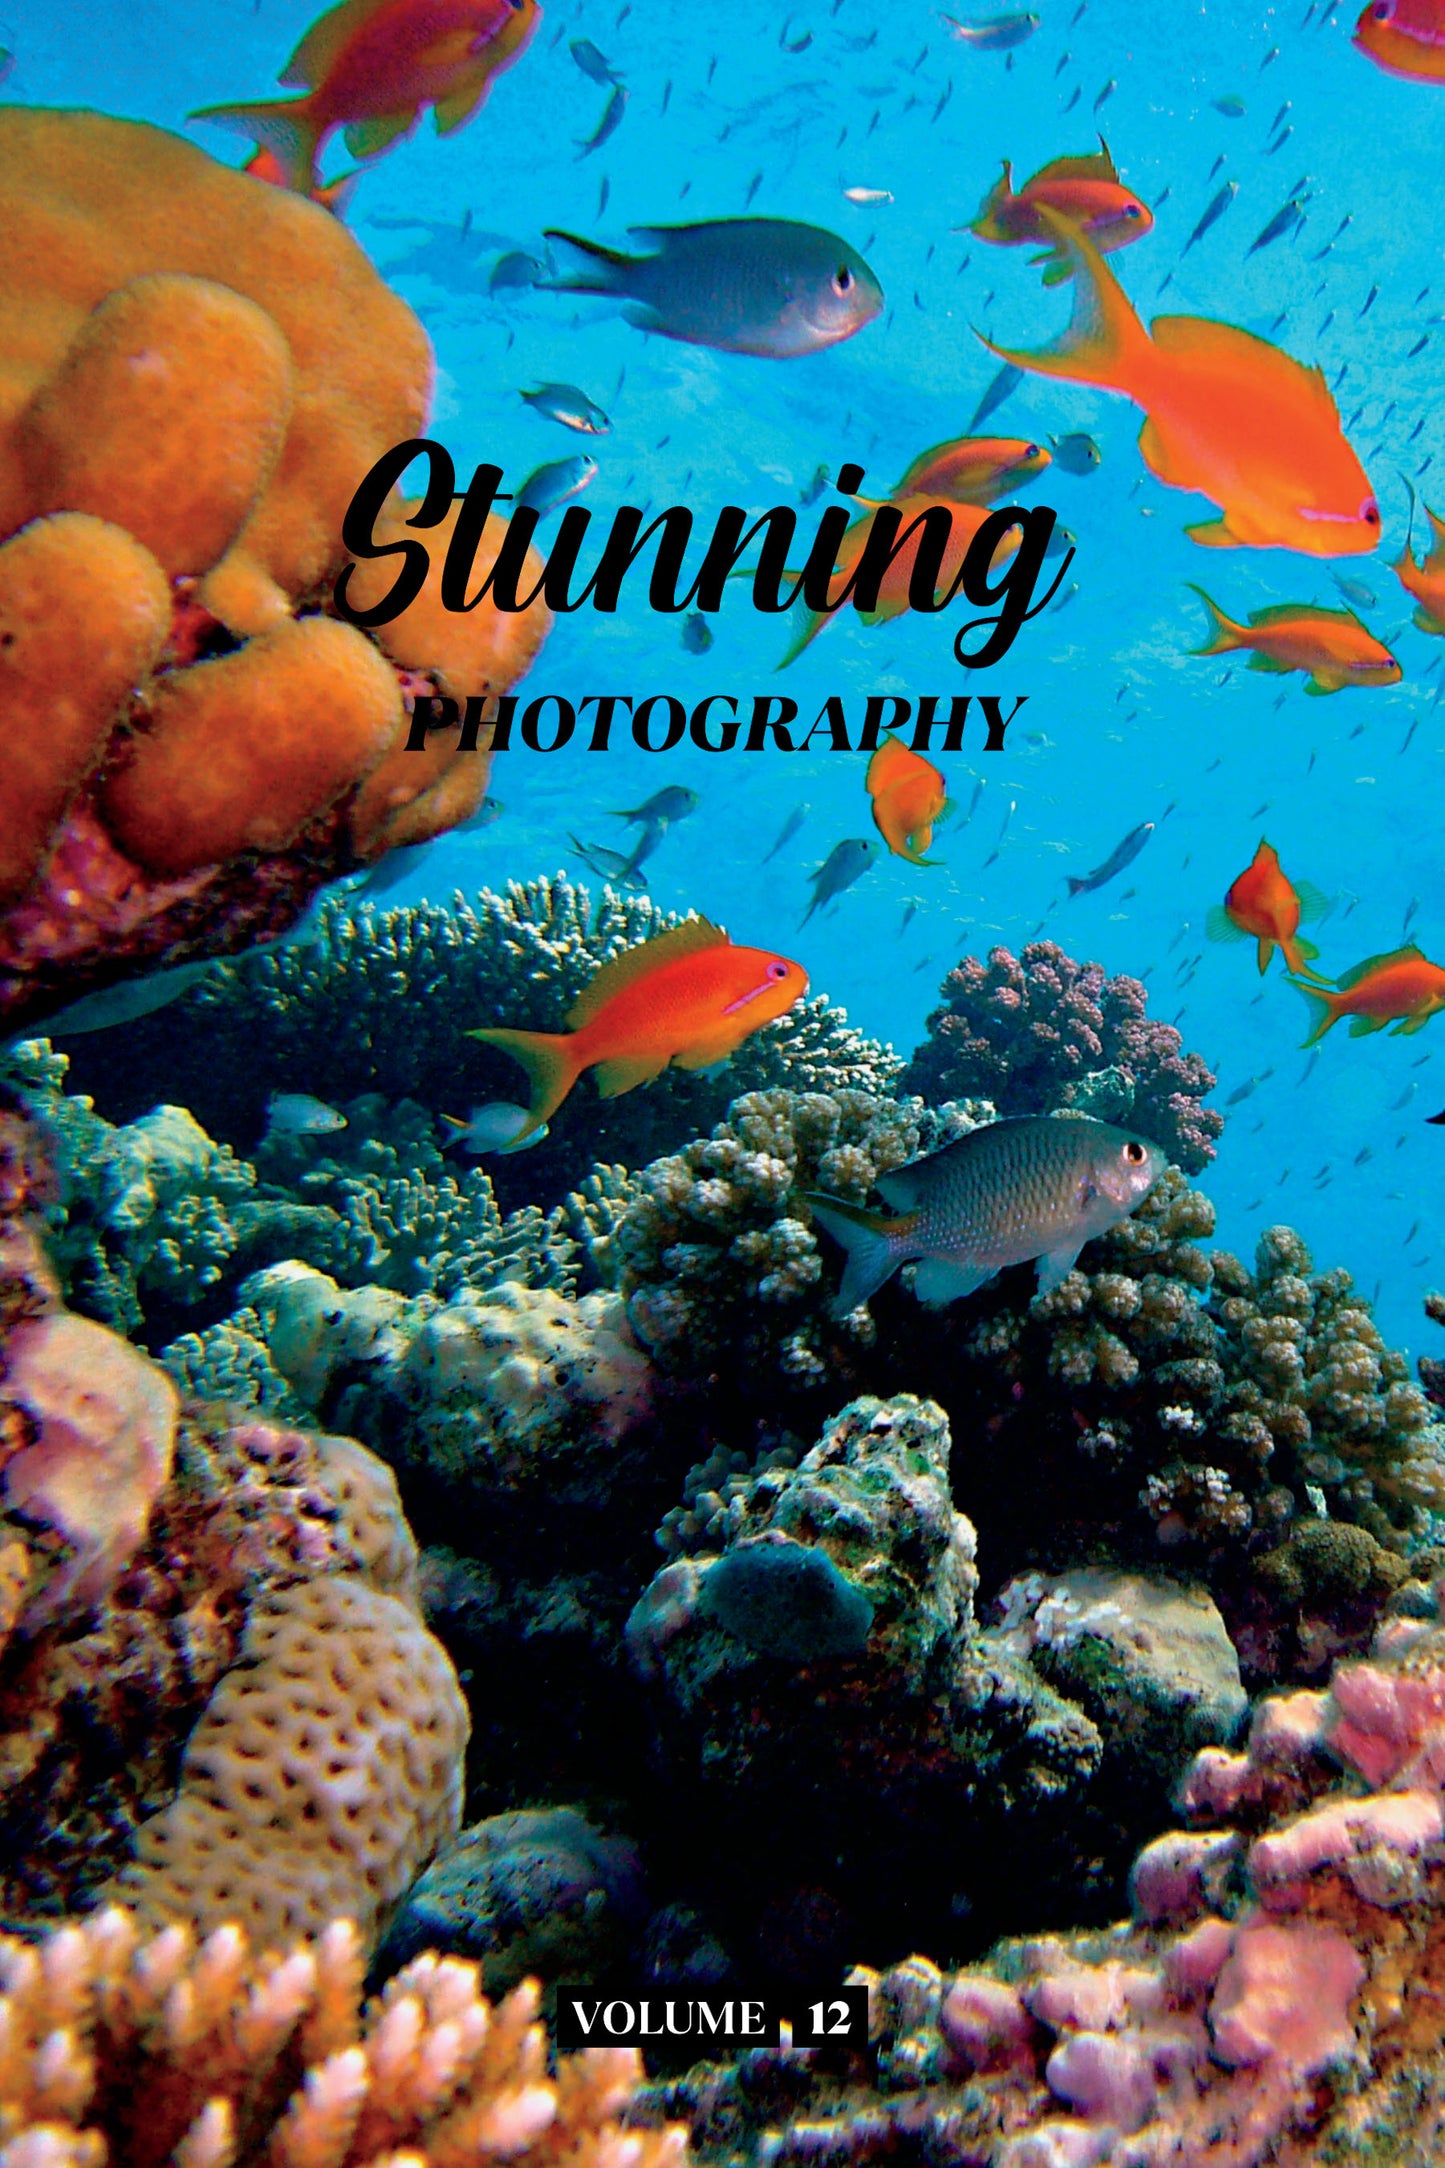 Stunning Photography Volume 12 (Physical Book)